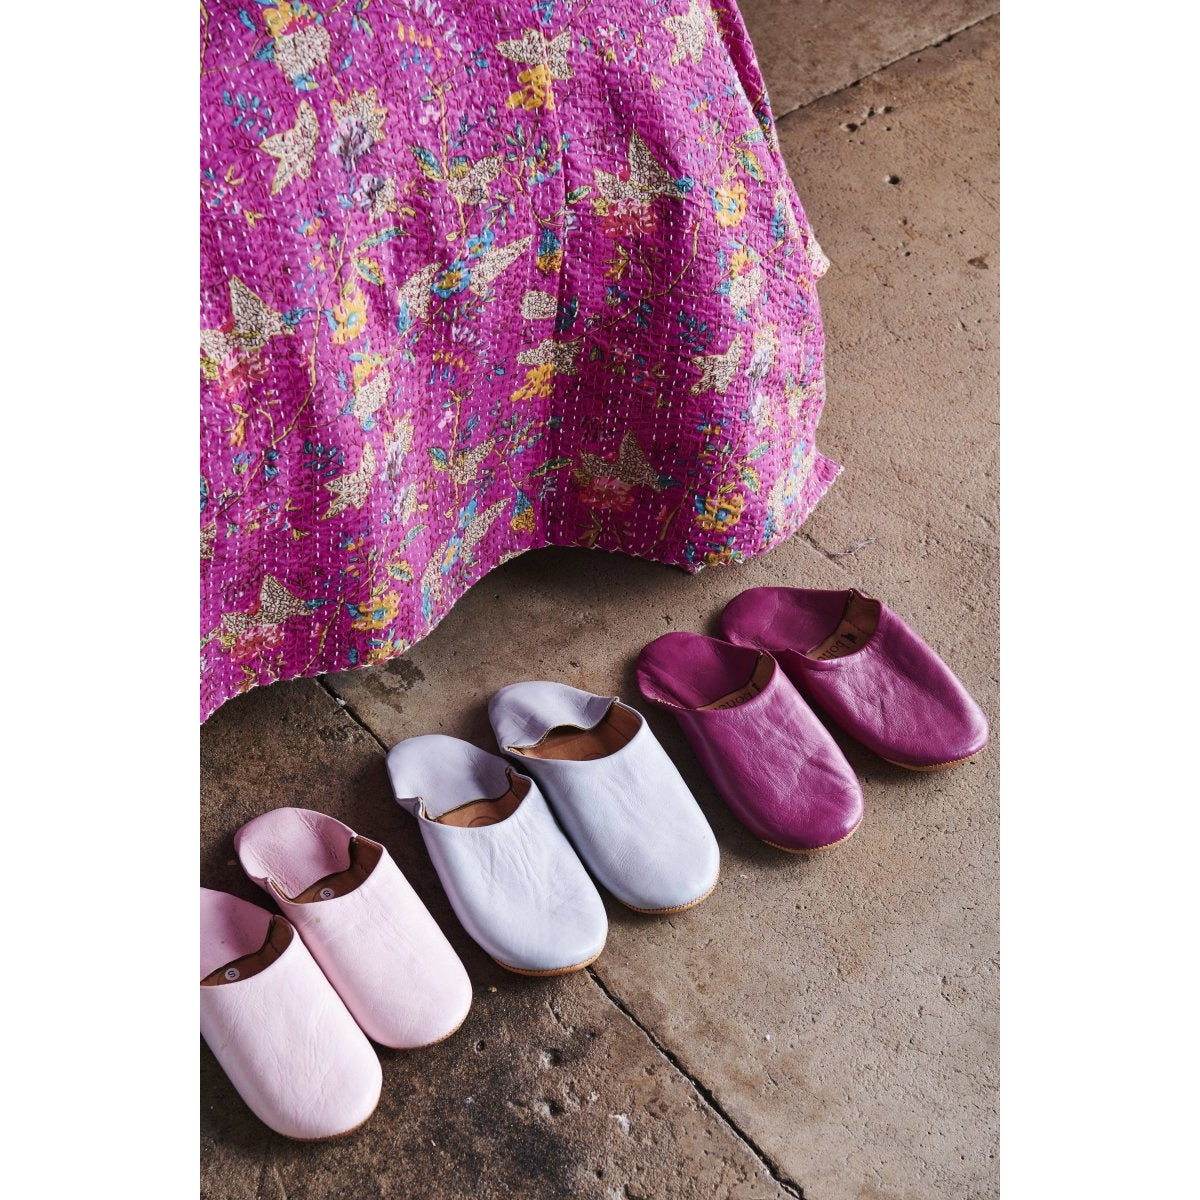 Moroccan Leather Babouche Slippers in Pink-Jade and May-Slippers-Jade and May